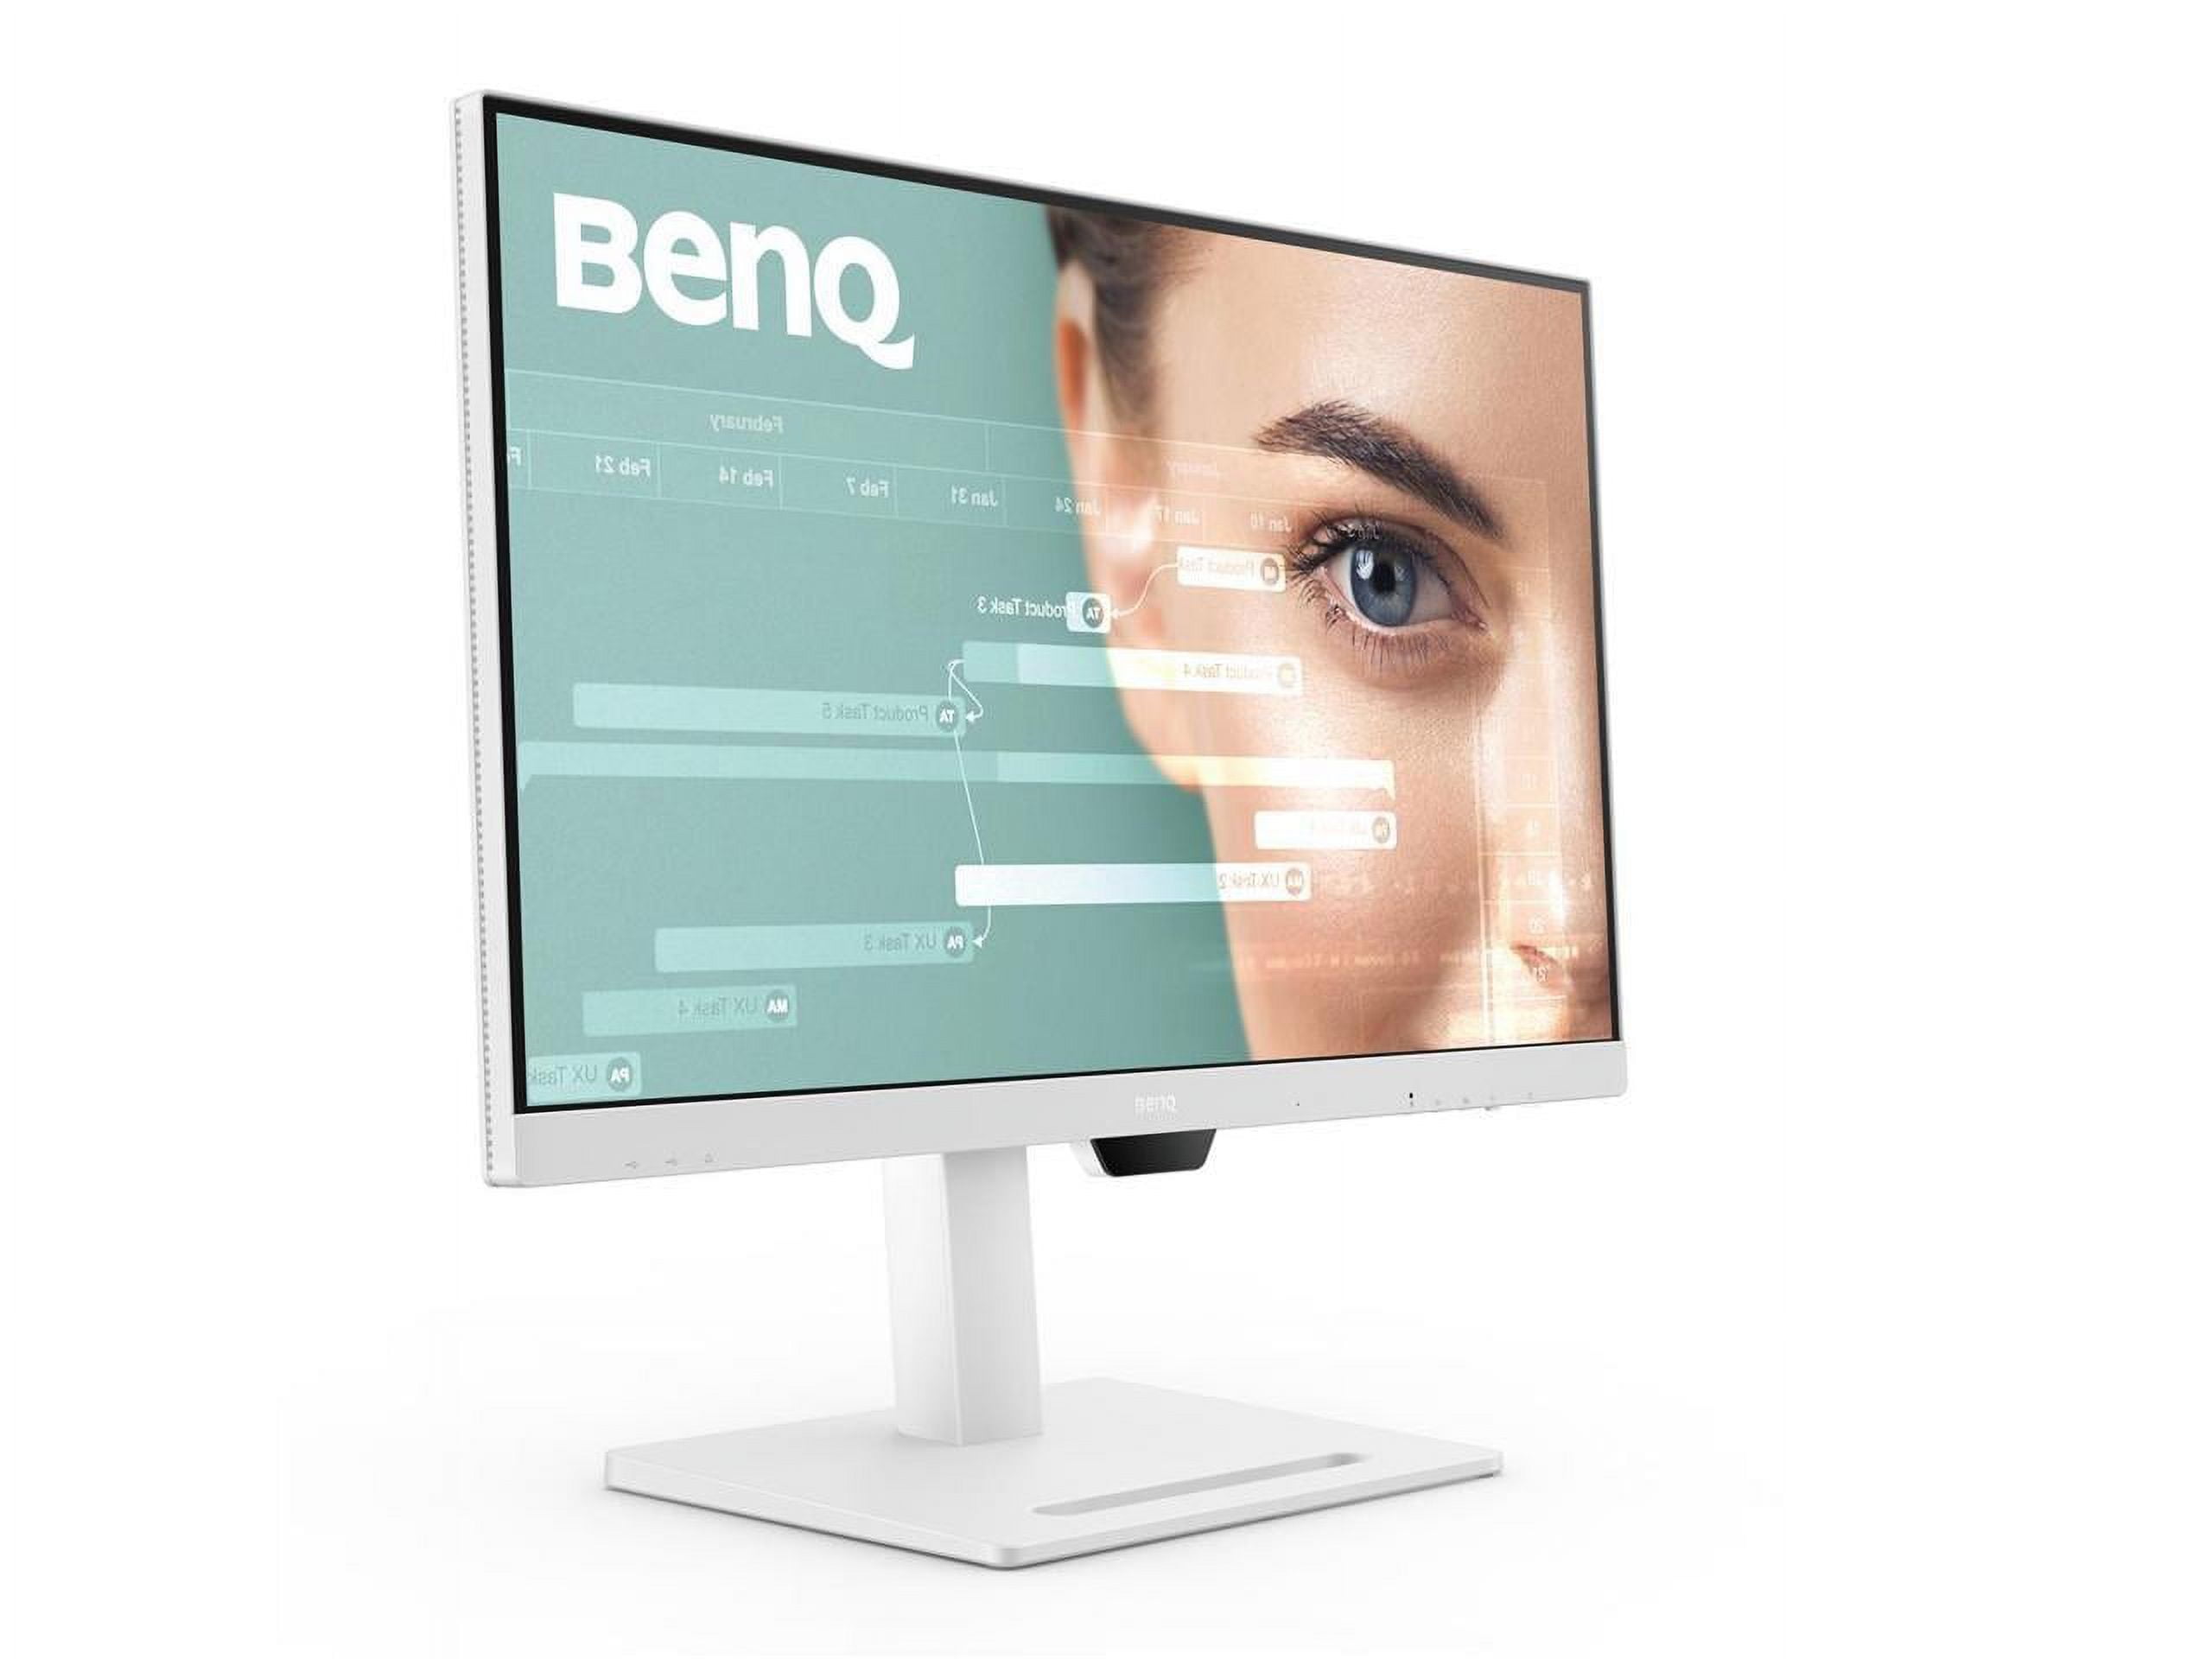 Led BenQ Computer Monitor, Screen Size: 19-22.9 at Rs 3500 in